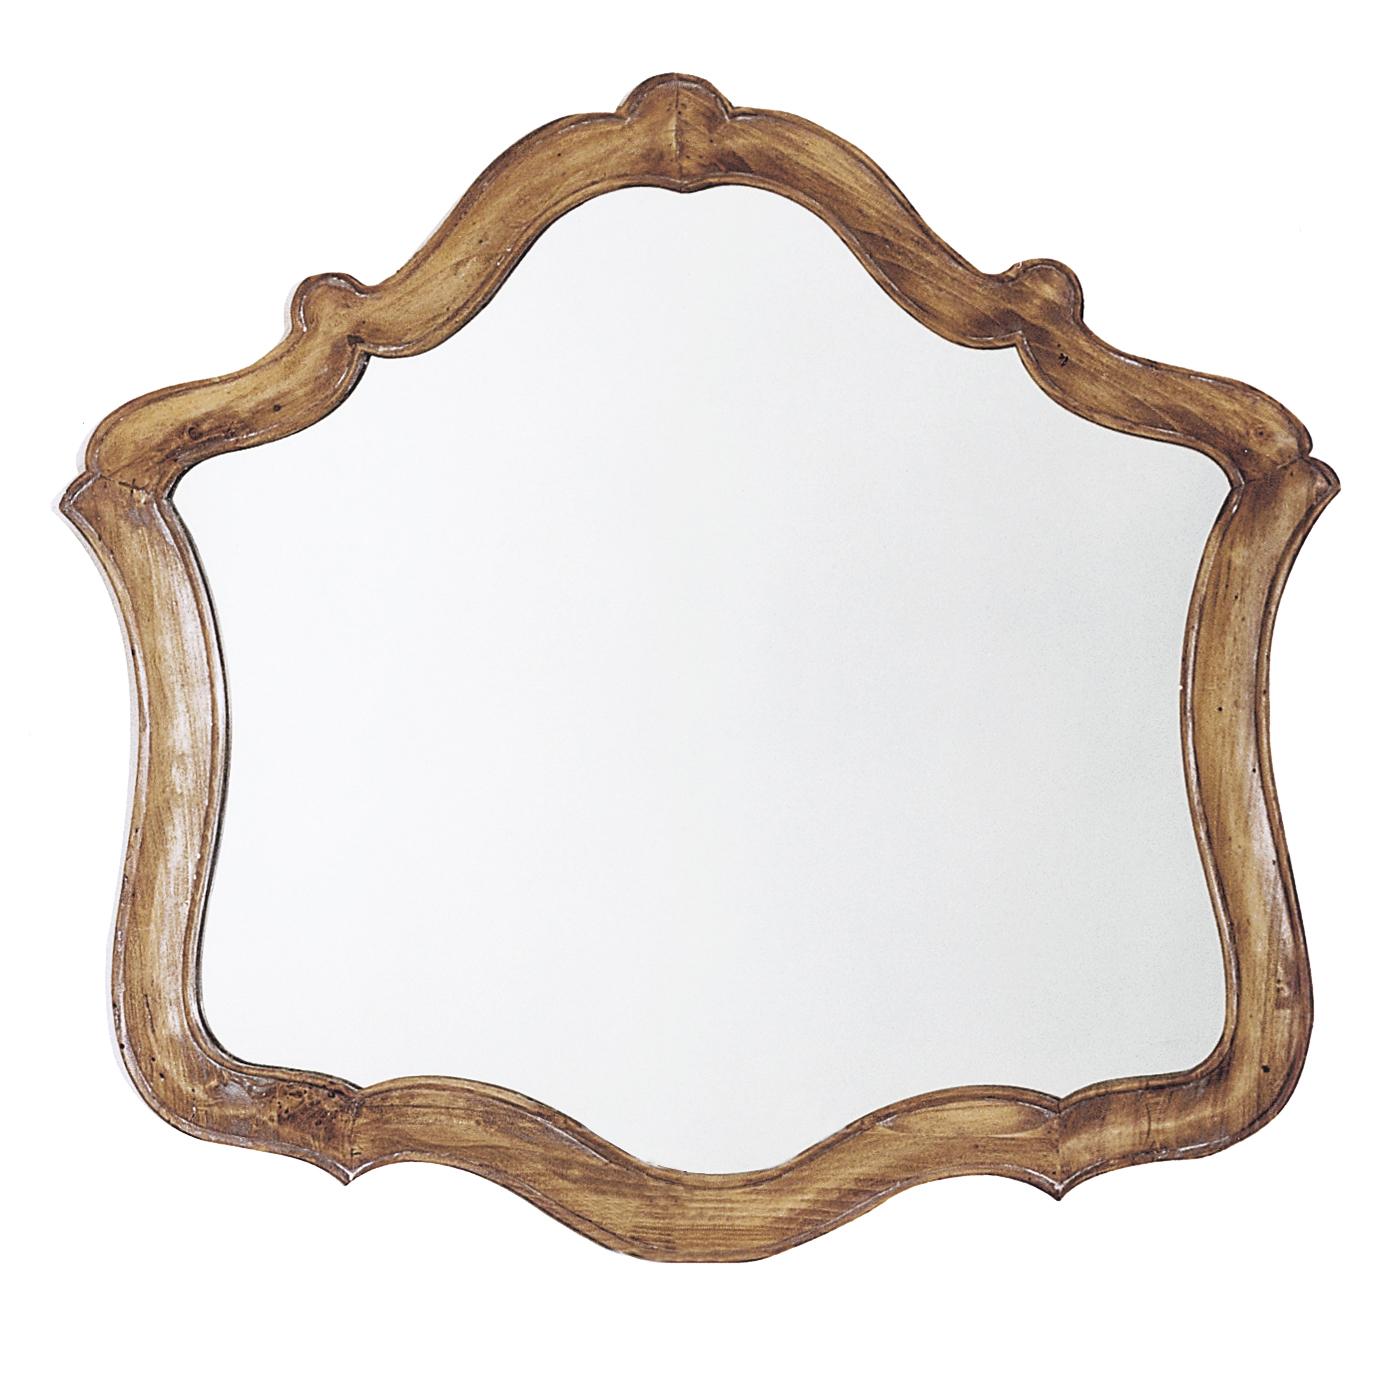 The delicate curves that form the sinuous silhouette of this mirror frame lend it an elegant and Classic allure that boasts the centuries-old tradition of its masterful craftsmanship. Entirely carved of wood, the frame was given a natural finish